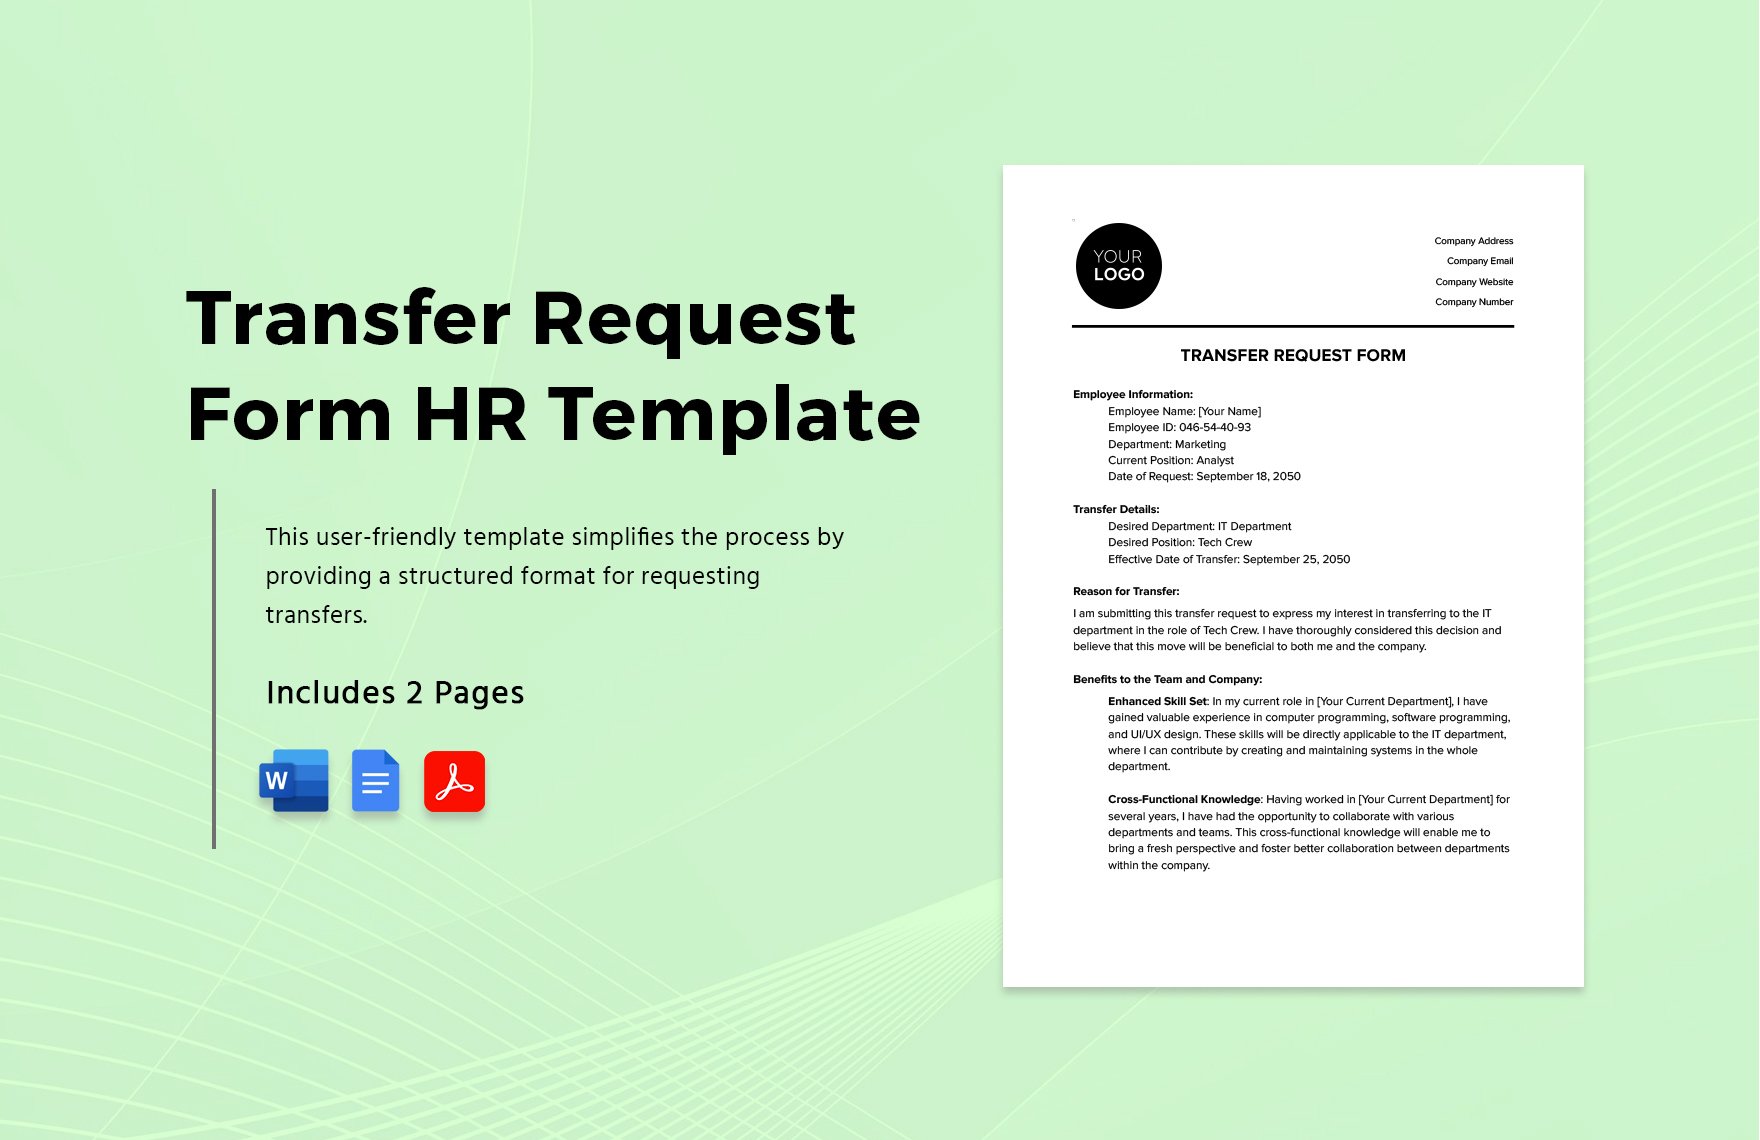 Transfer Request Form HR Template in Word, Google Docs, PDF